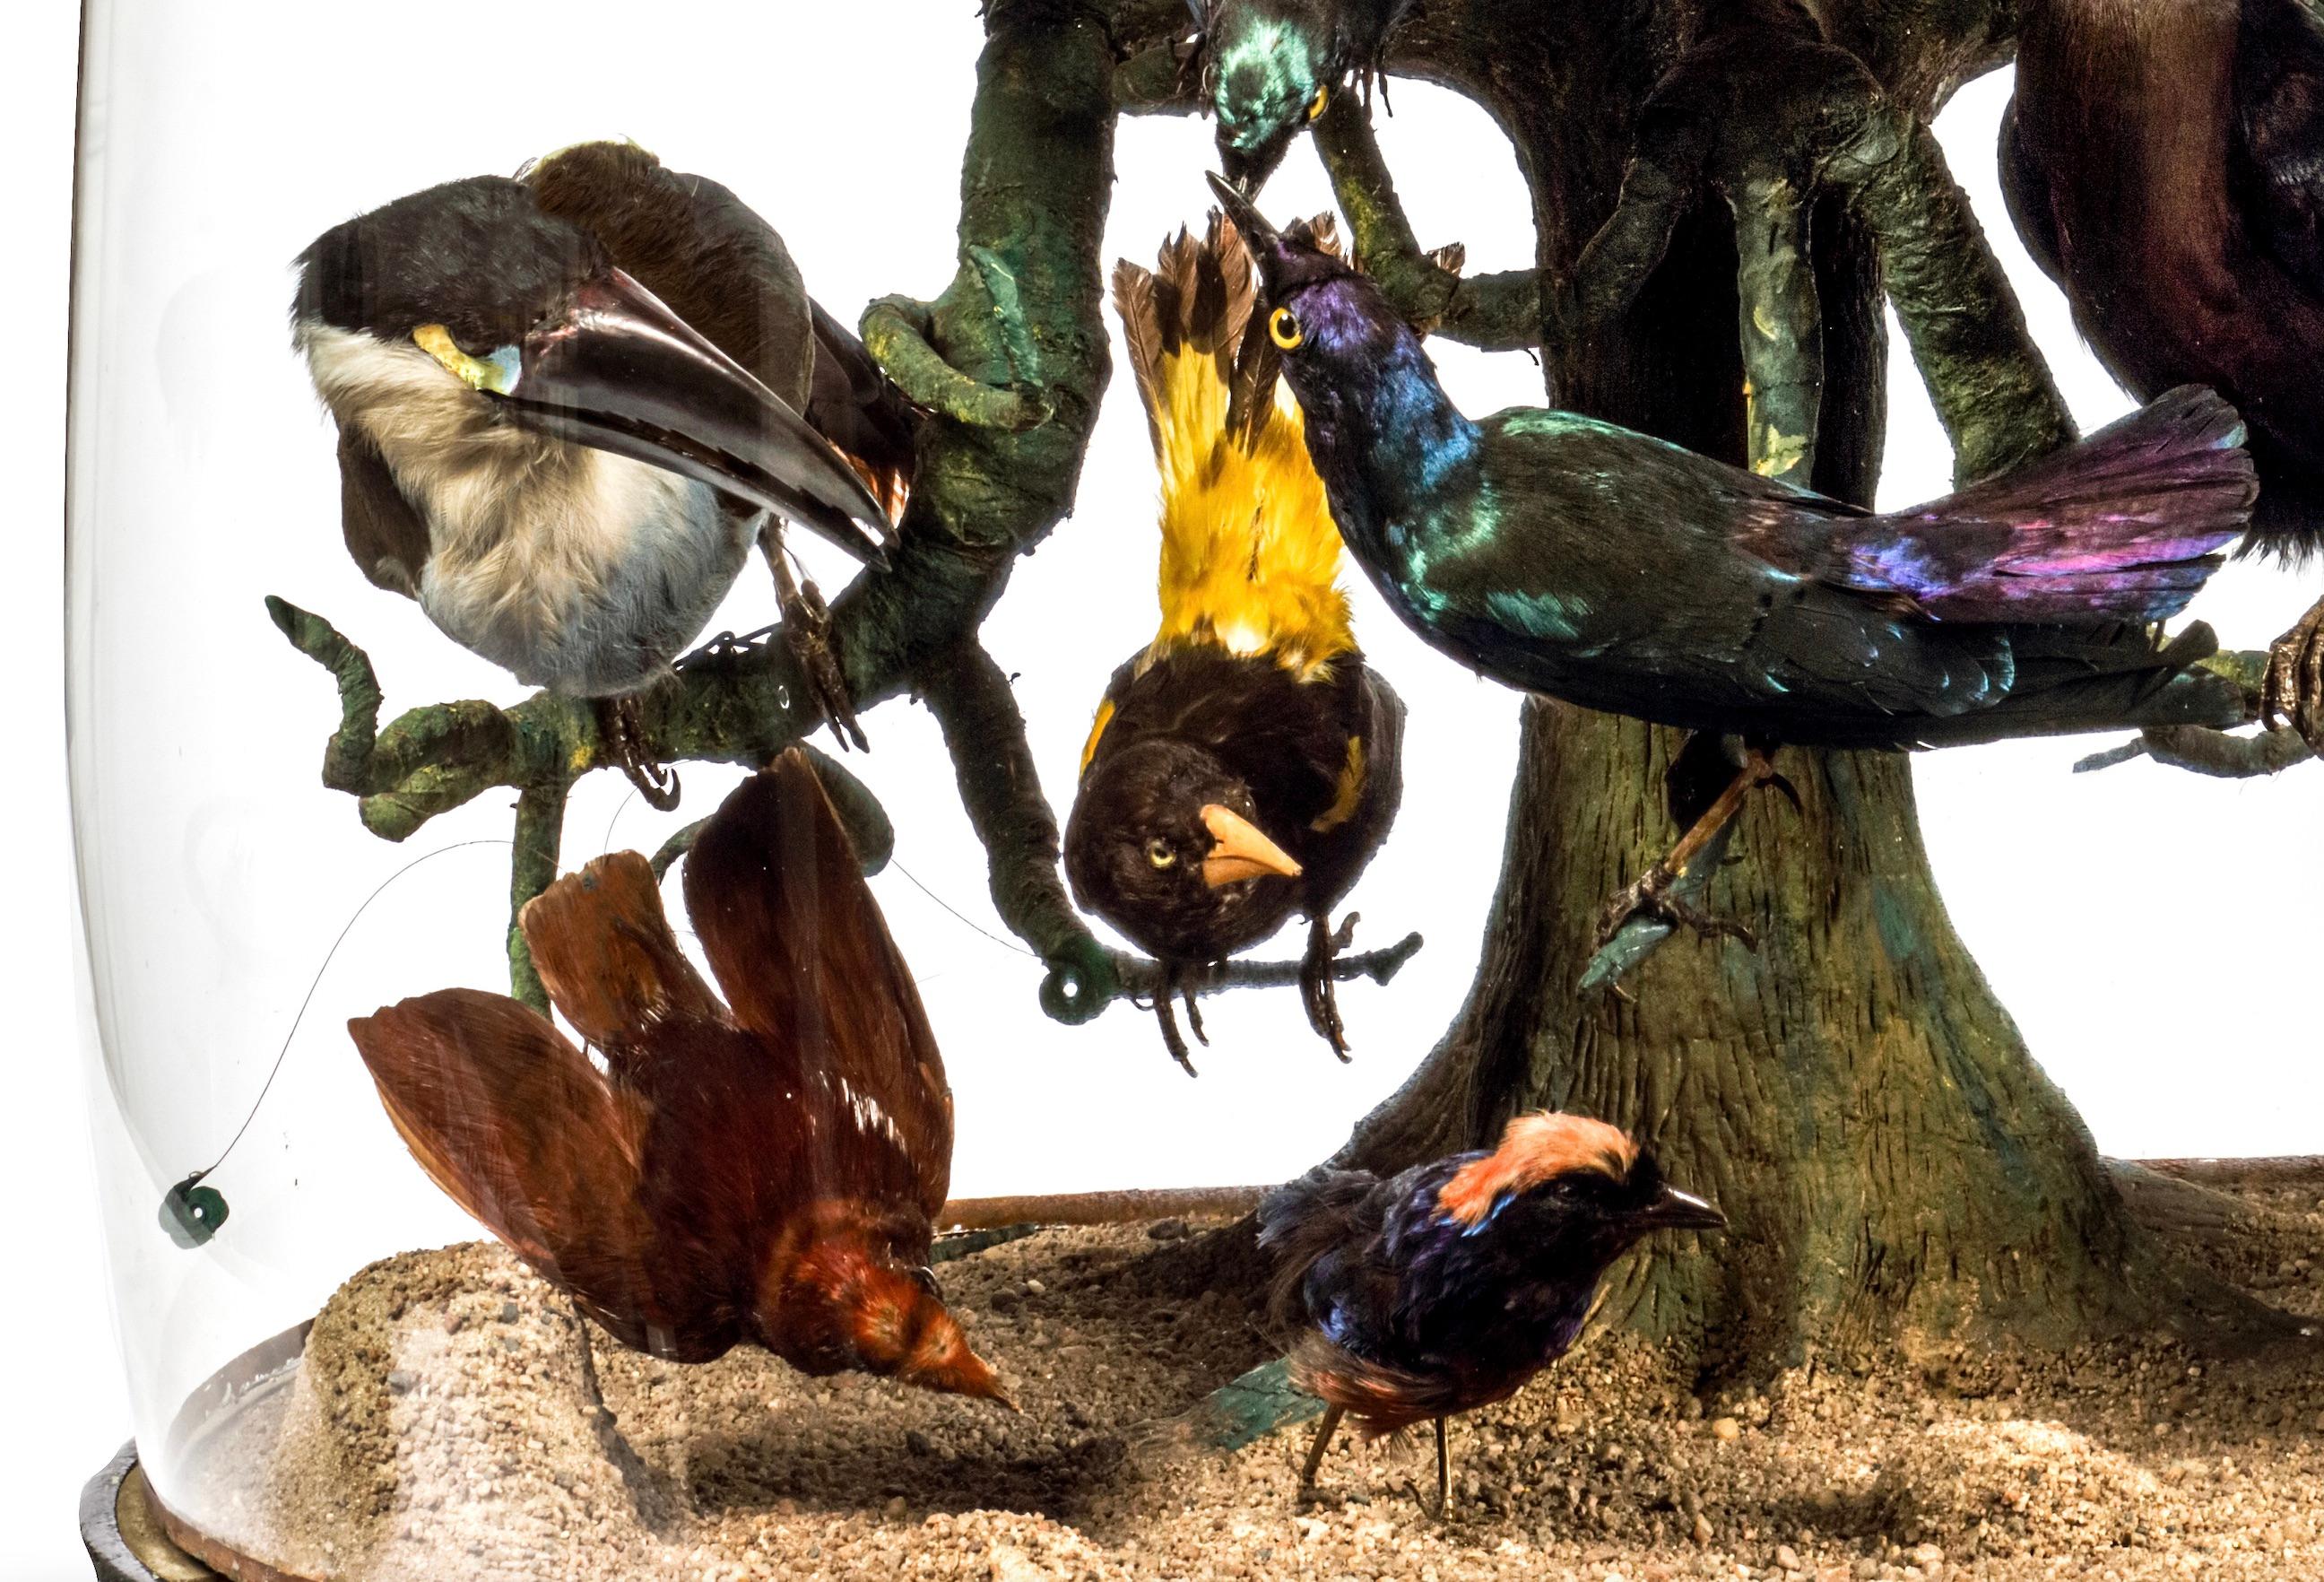 Huge Monumental Victorian Taxidermy Dome with Colorfull Tropical Birds, C. 1850 For Sale 1